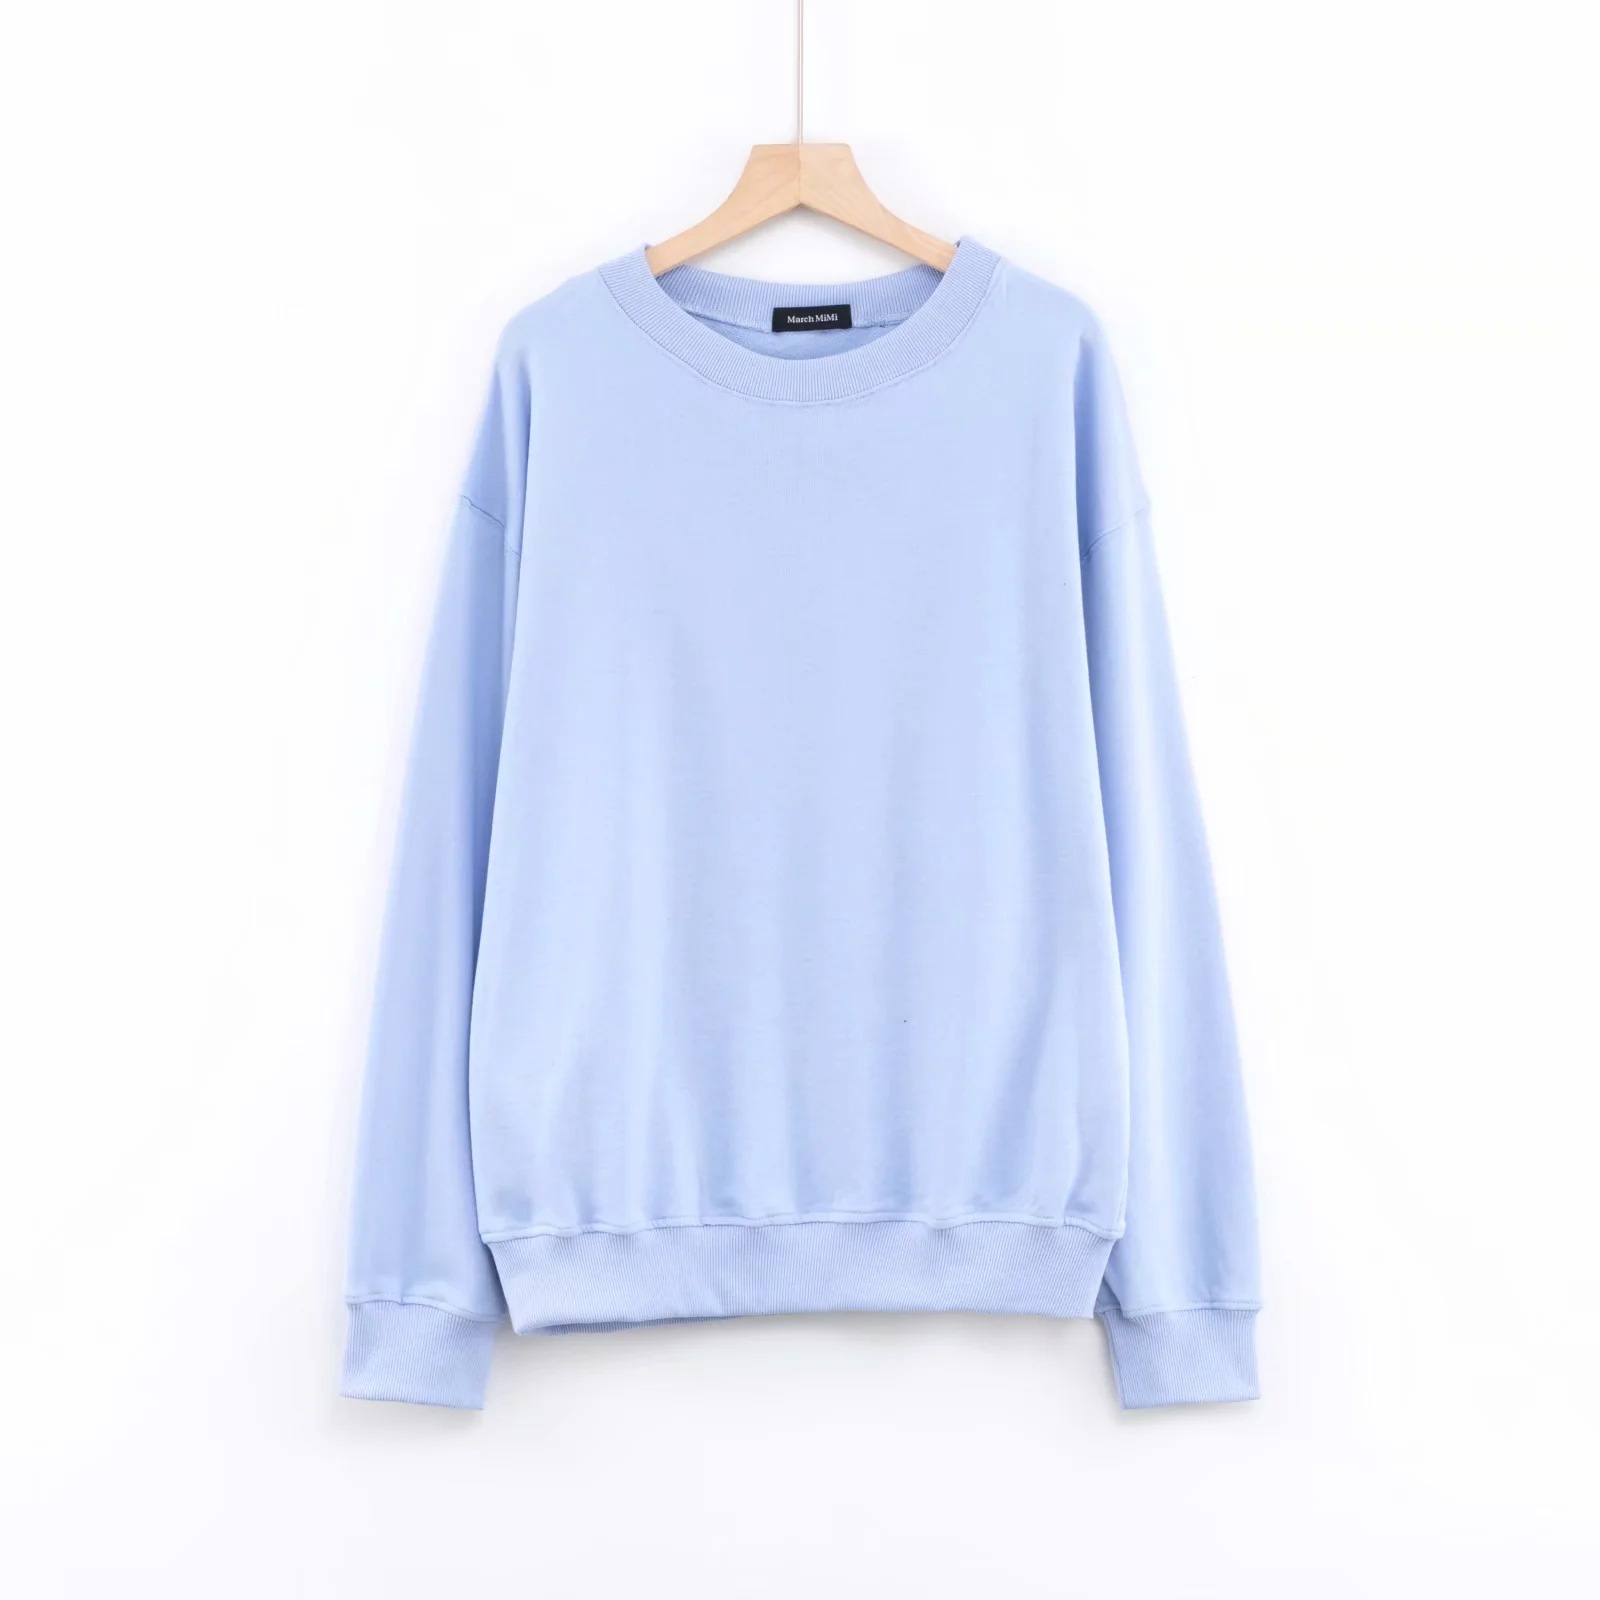 autumn and winter loose lazy round neck pullover top NSAC16693